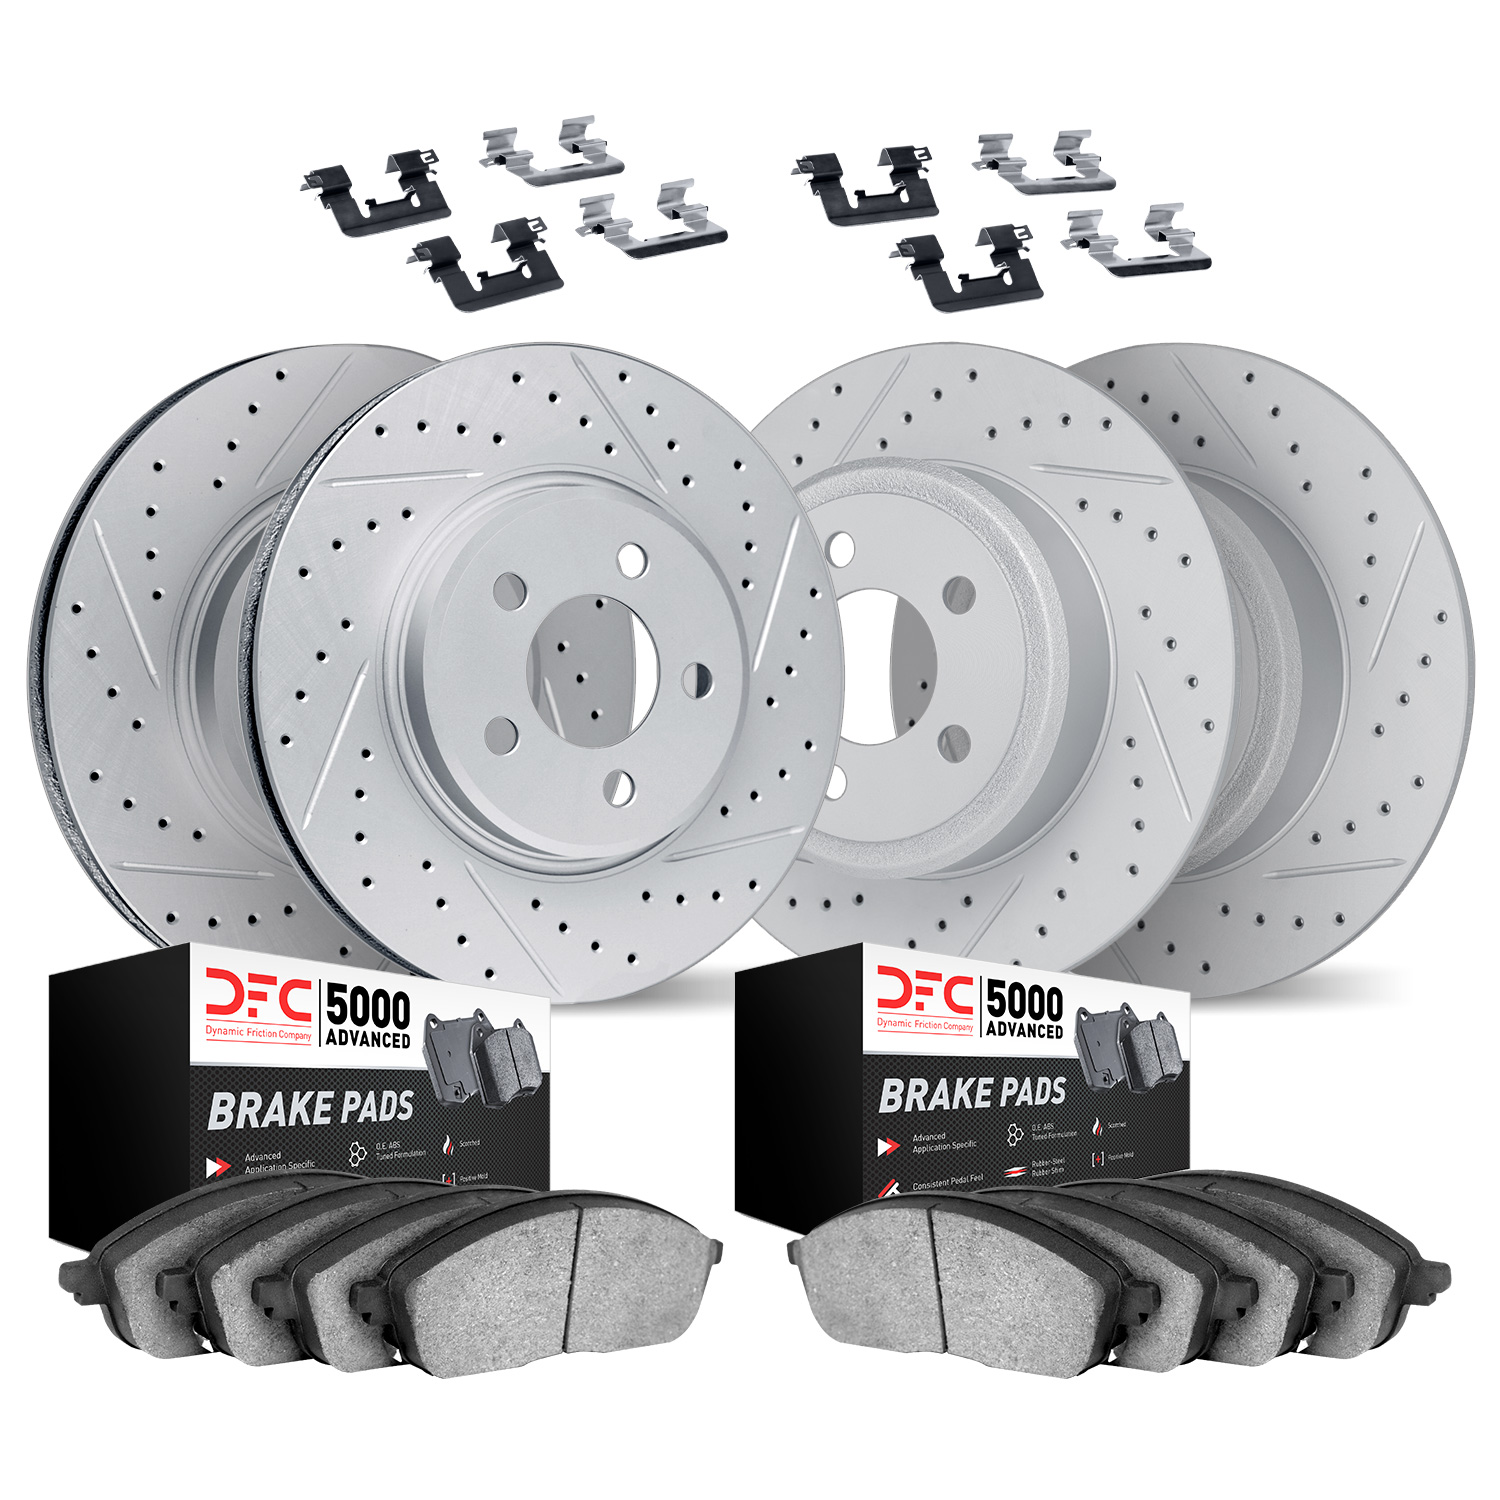 2514-32011 Geoperformance Drilled/Slotted Rotors w/5000 Advanced Brake Pads Kit & Hardware, 2015-2019 Mini, Position: Front and